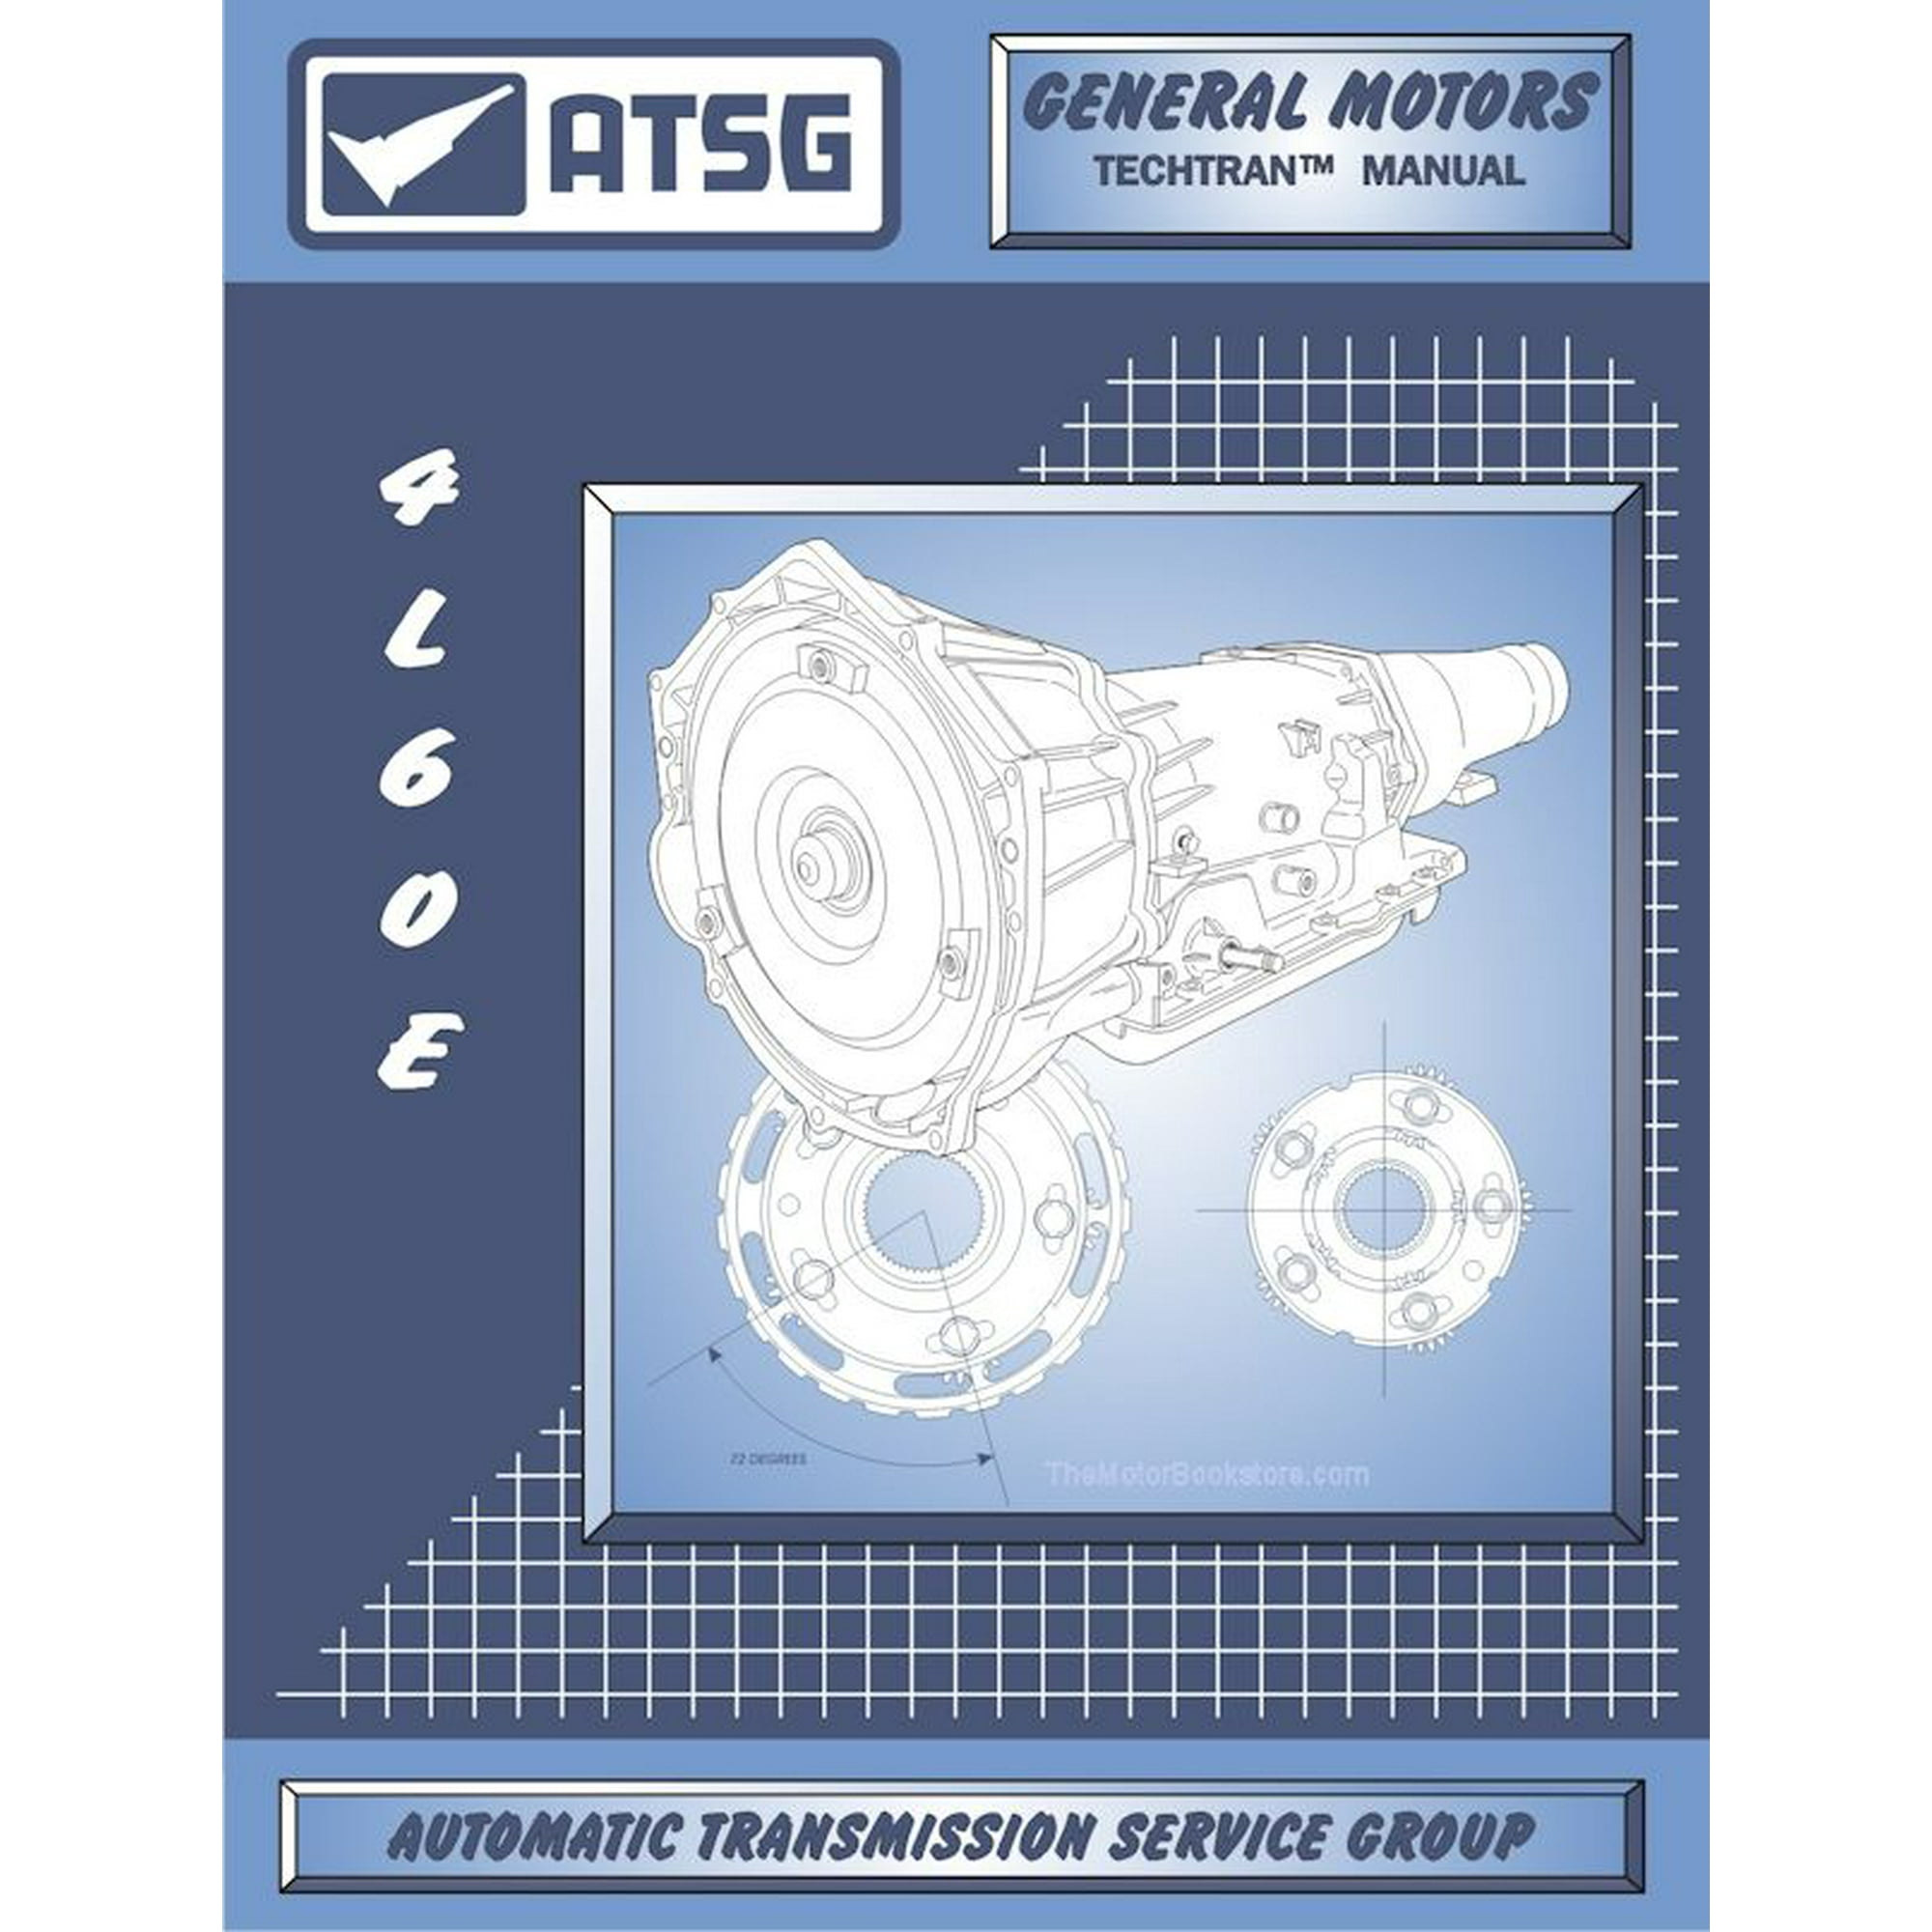 manuals for automatic transmission rebuild